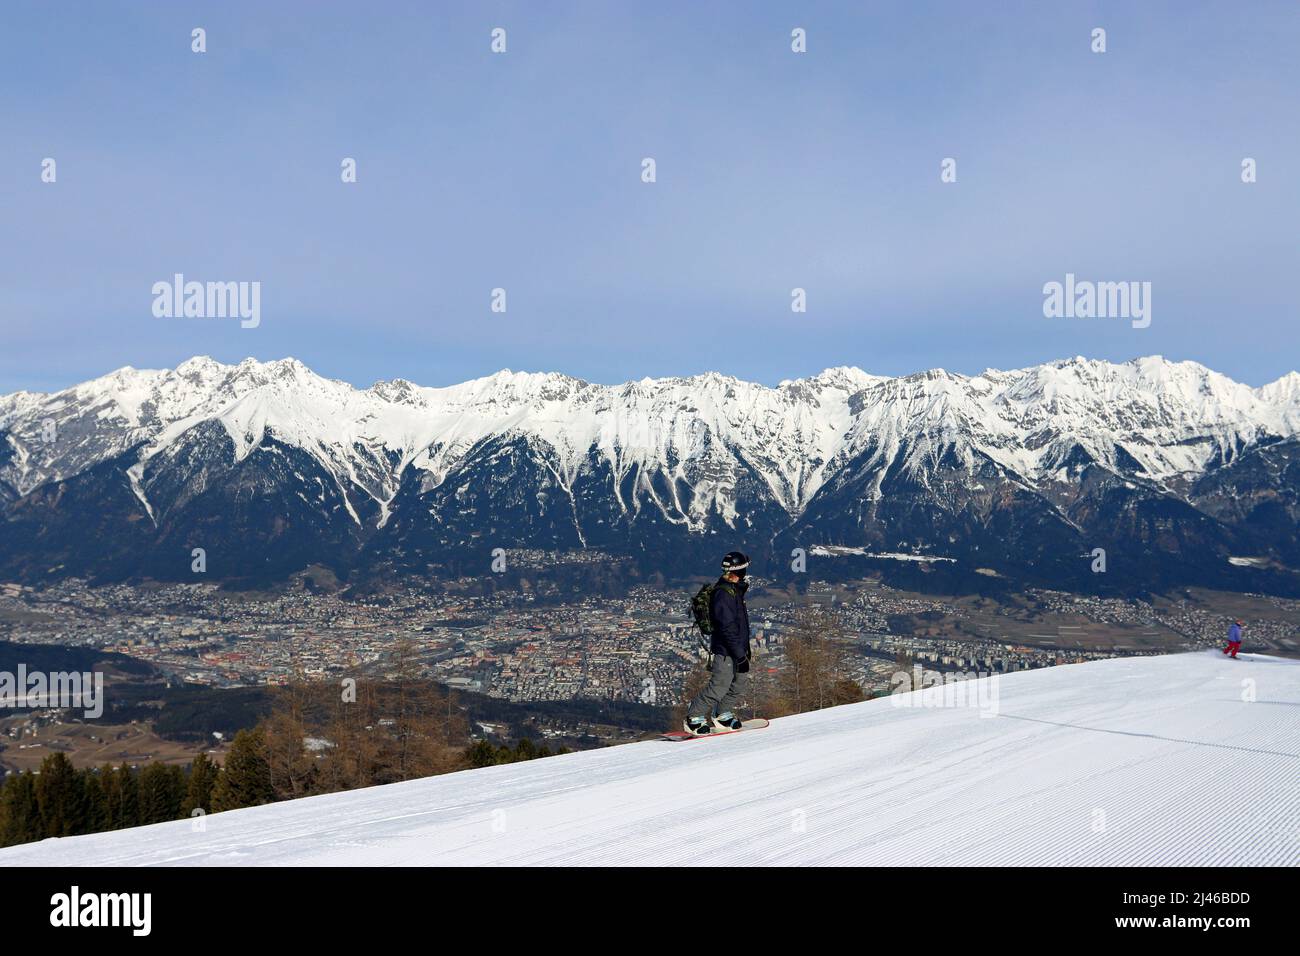 A snowboarder stands on Patscherkofel mountain. Innsbruck spreads out below against the snowy mountain backdrop of the Nordkette mountain range Stock Photo